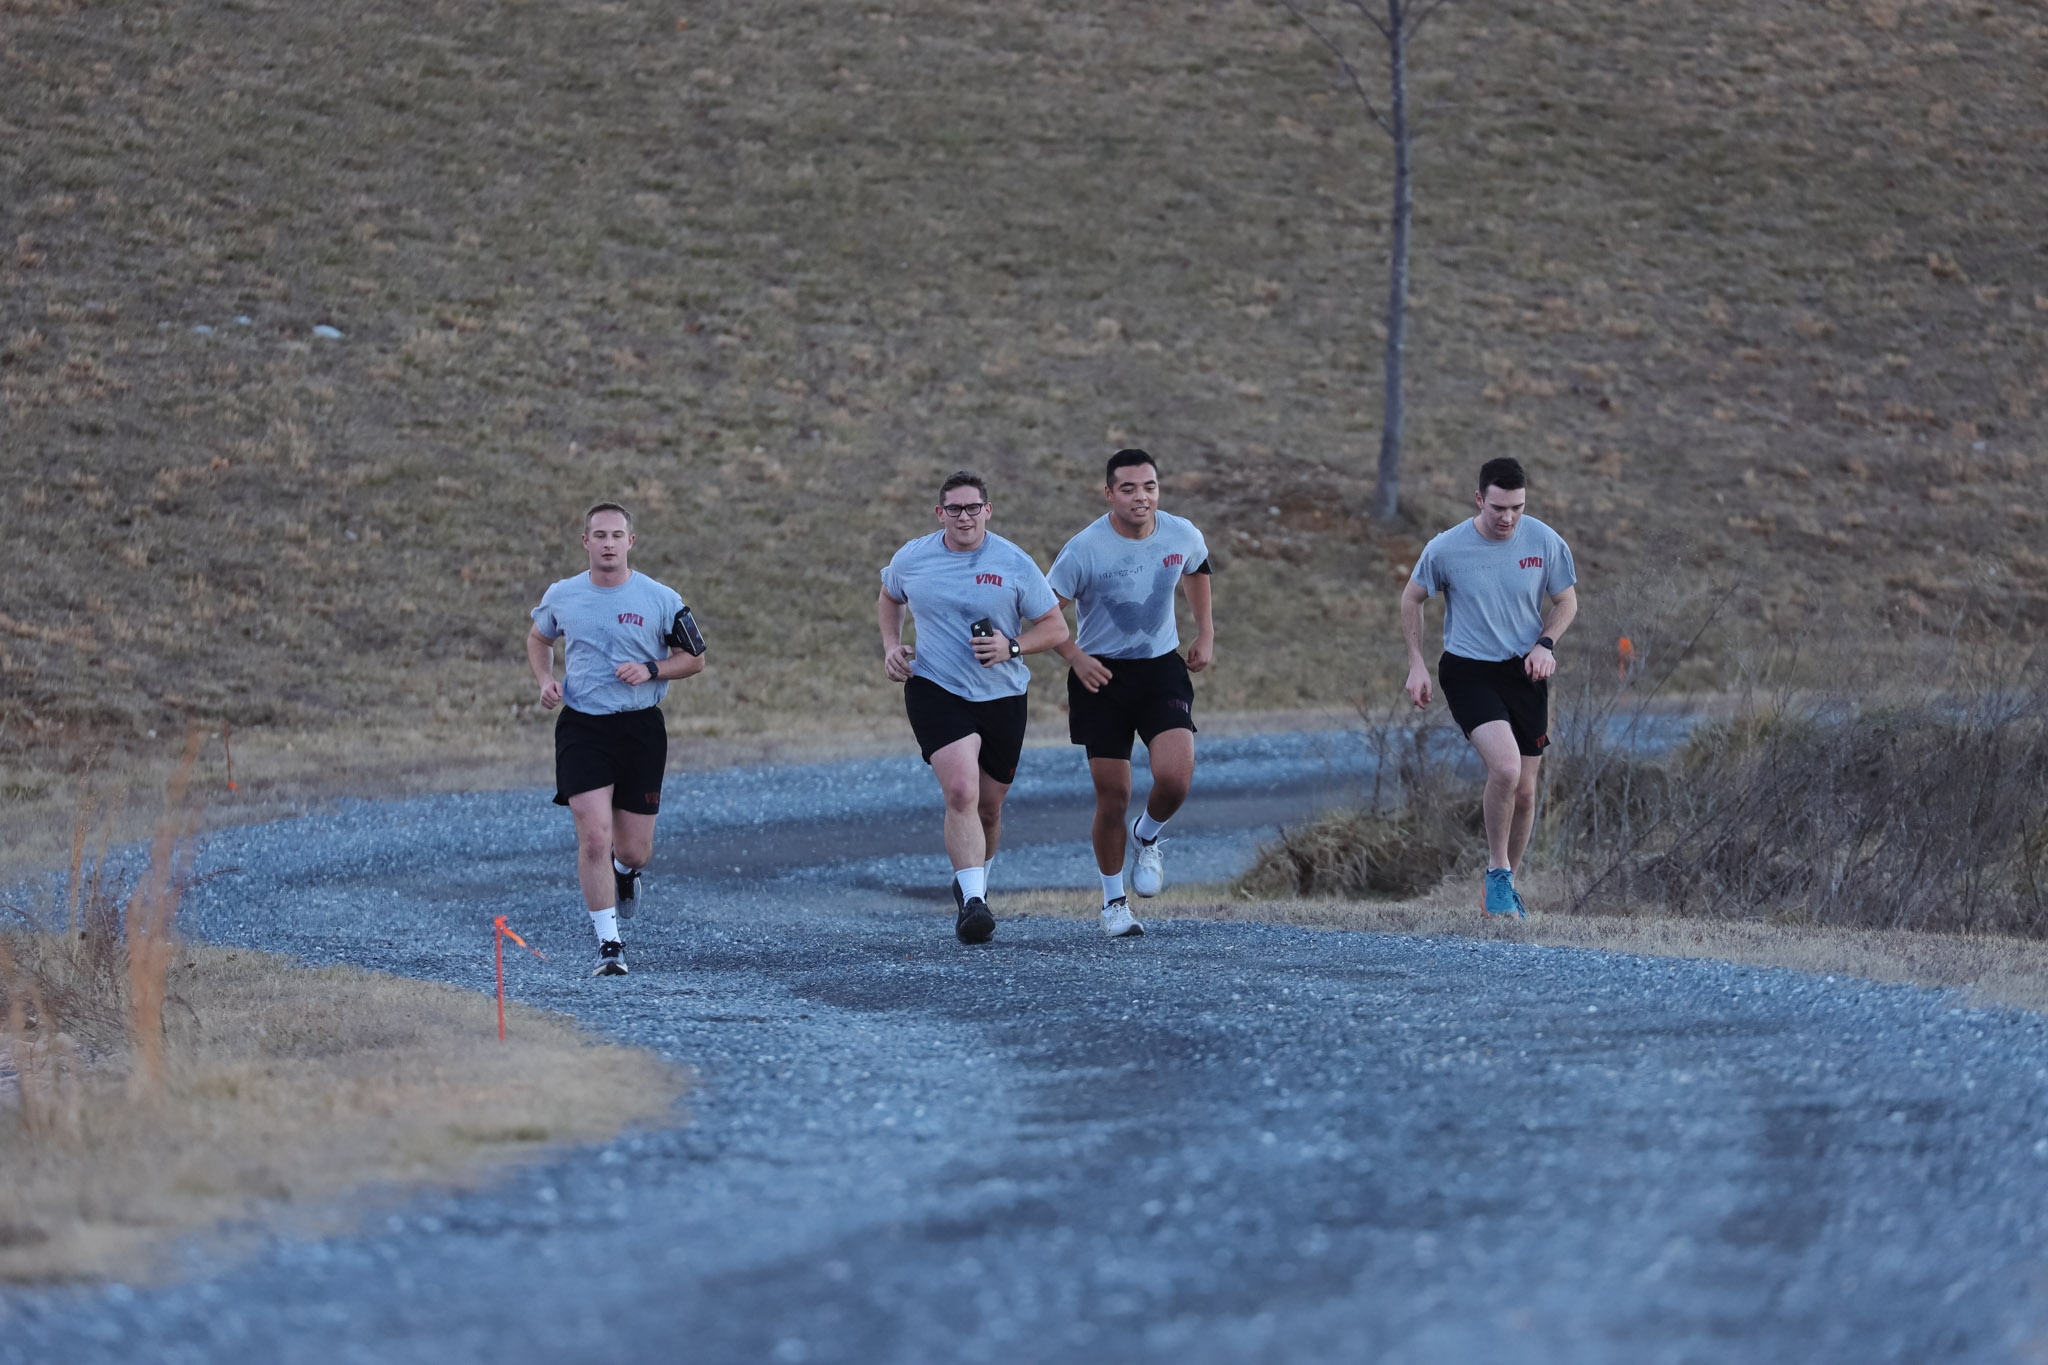 Students part of the Marathon Club at VMI, a military college in Virginia